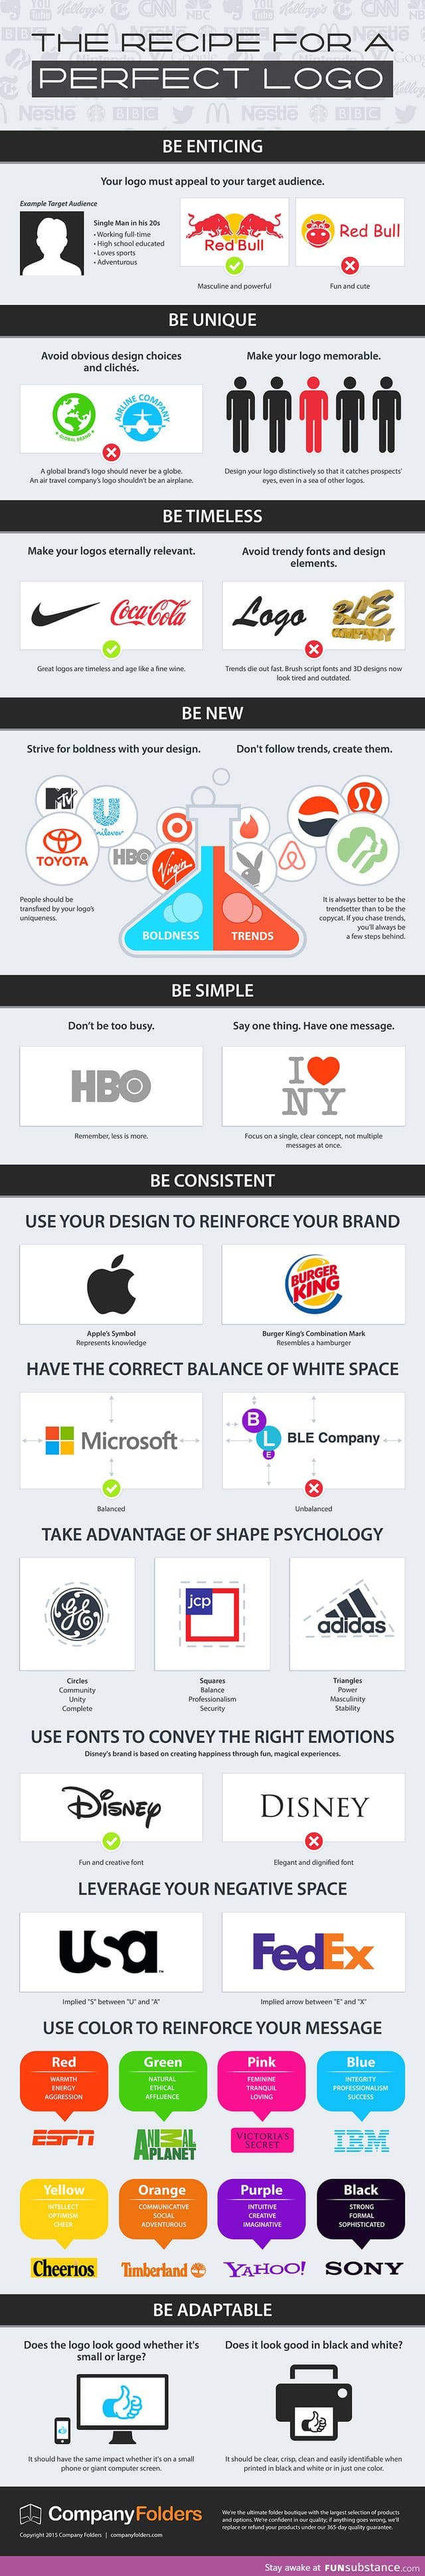 How to Design the Perfect Business Logo (Infographic)